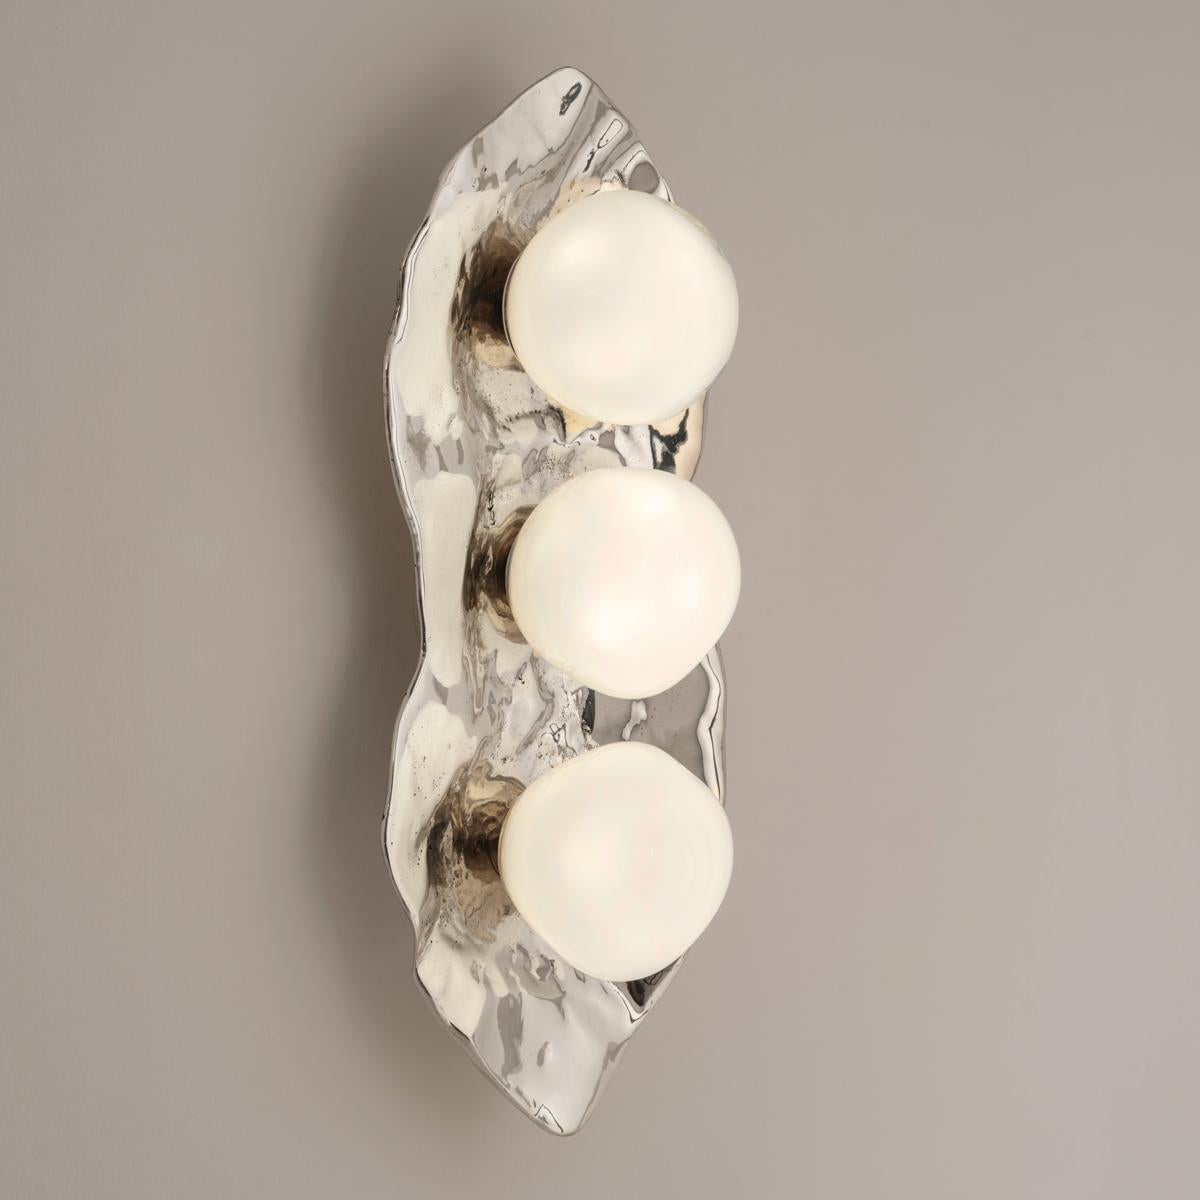 The Shell wall light is forged from brass to create an organic shell nestling three of our handblown Sfera glasses made in Murano.

Shown in the primary images in polished nickel -subsequent pictures show the fixture in other featured